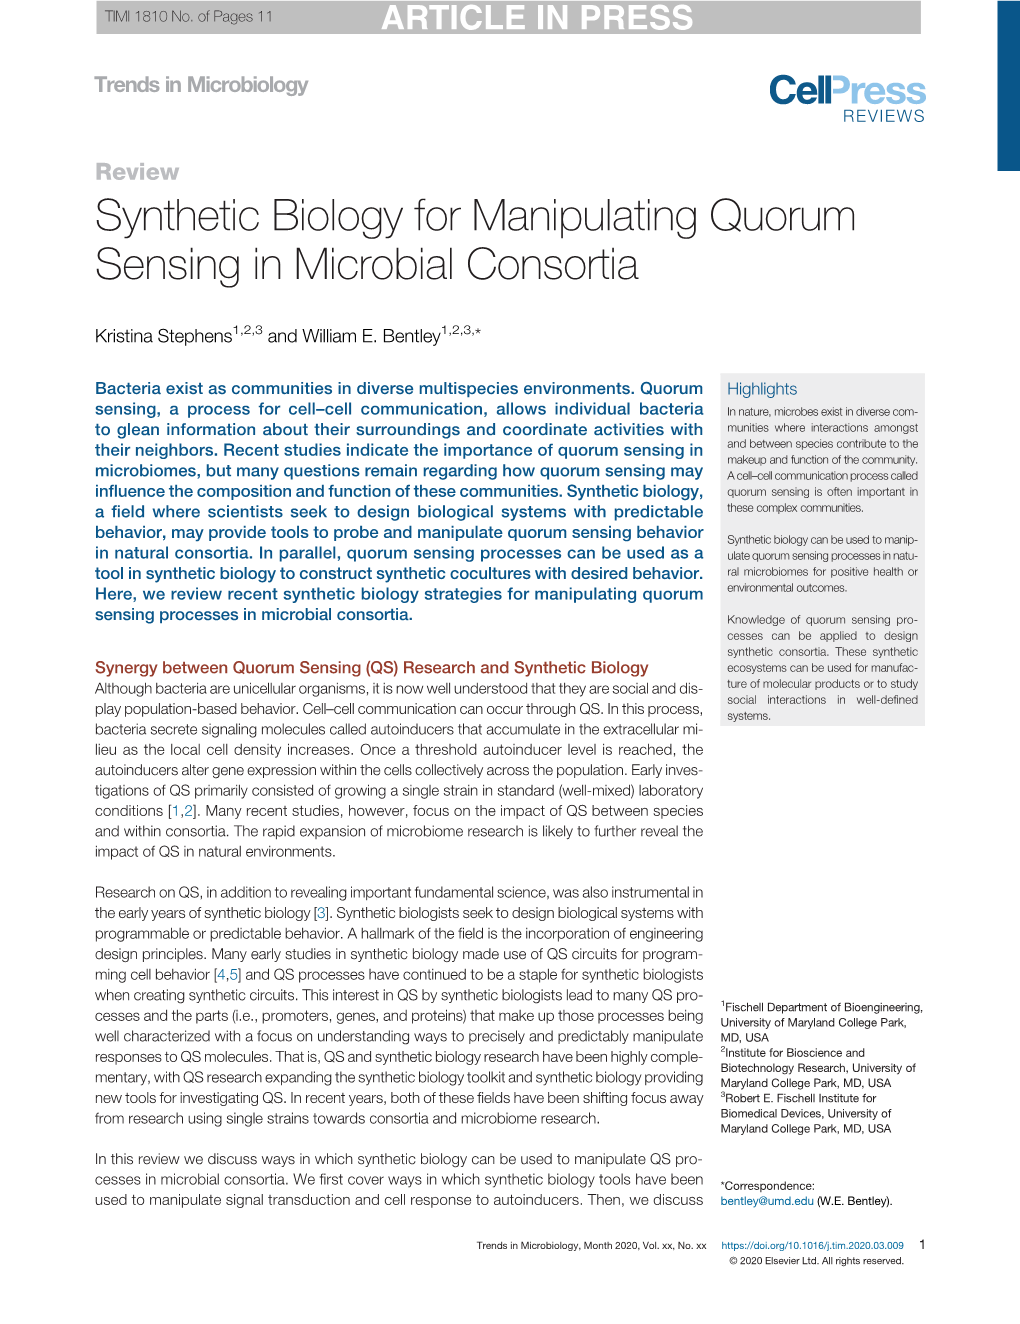 Synthetic Biology for Manipulating Quorum Sensing in Microbial Consortia